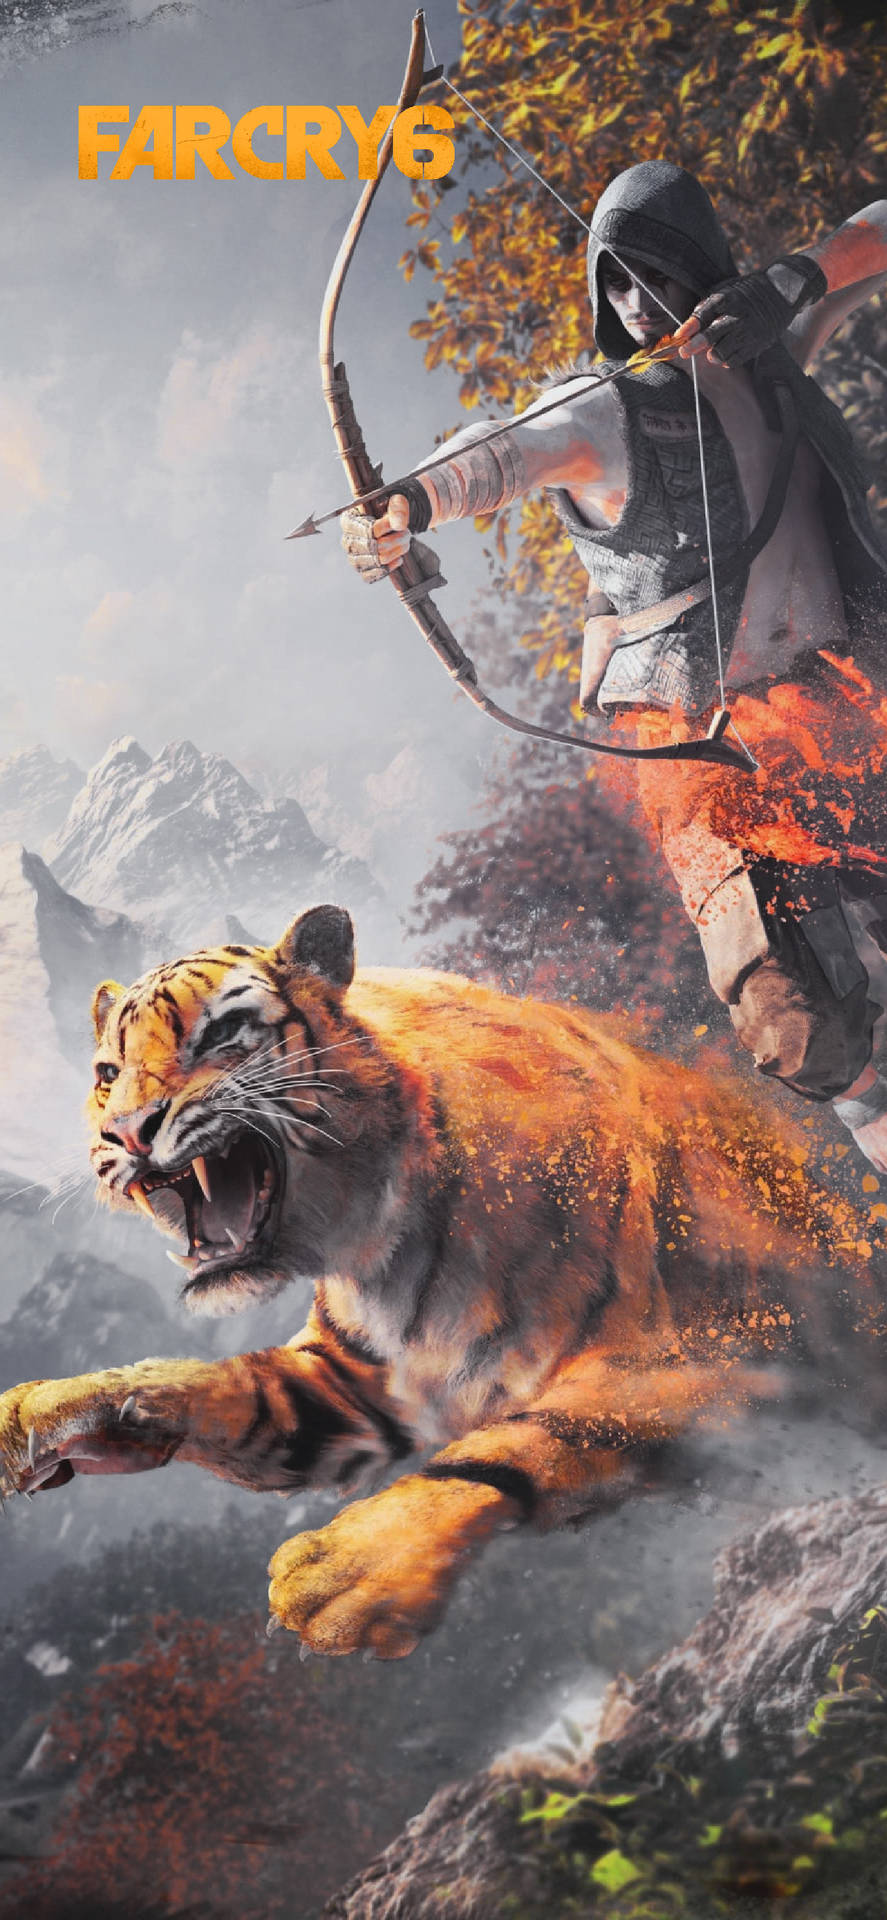 Archer And Tiger Far Cry Iphone Background